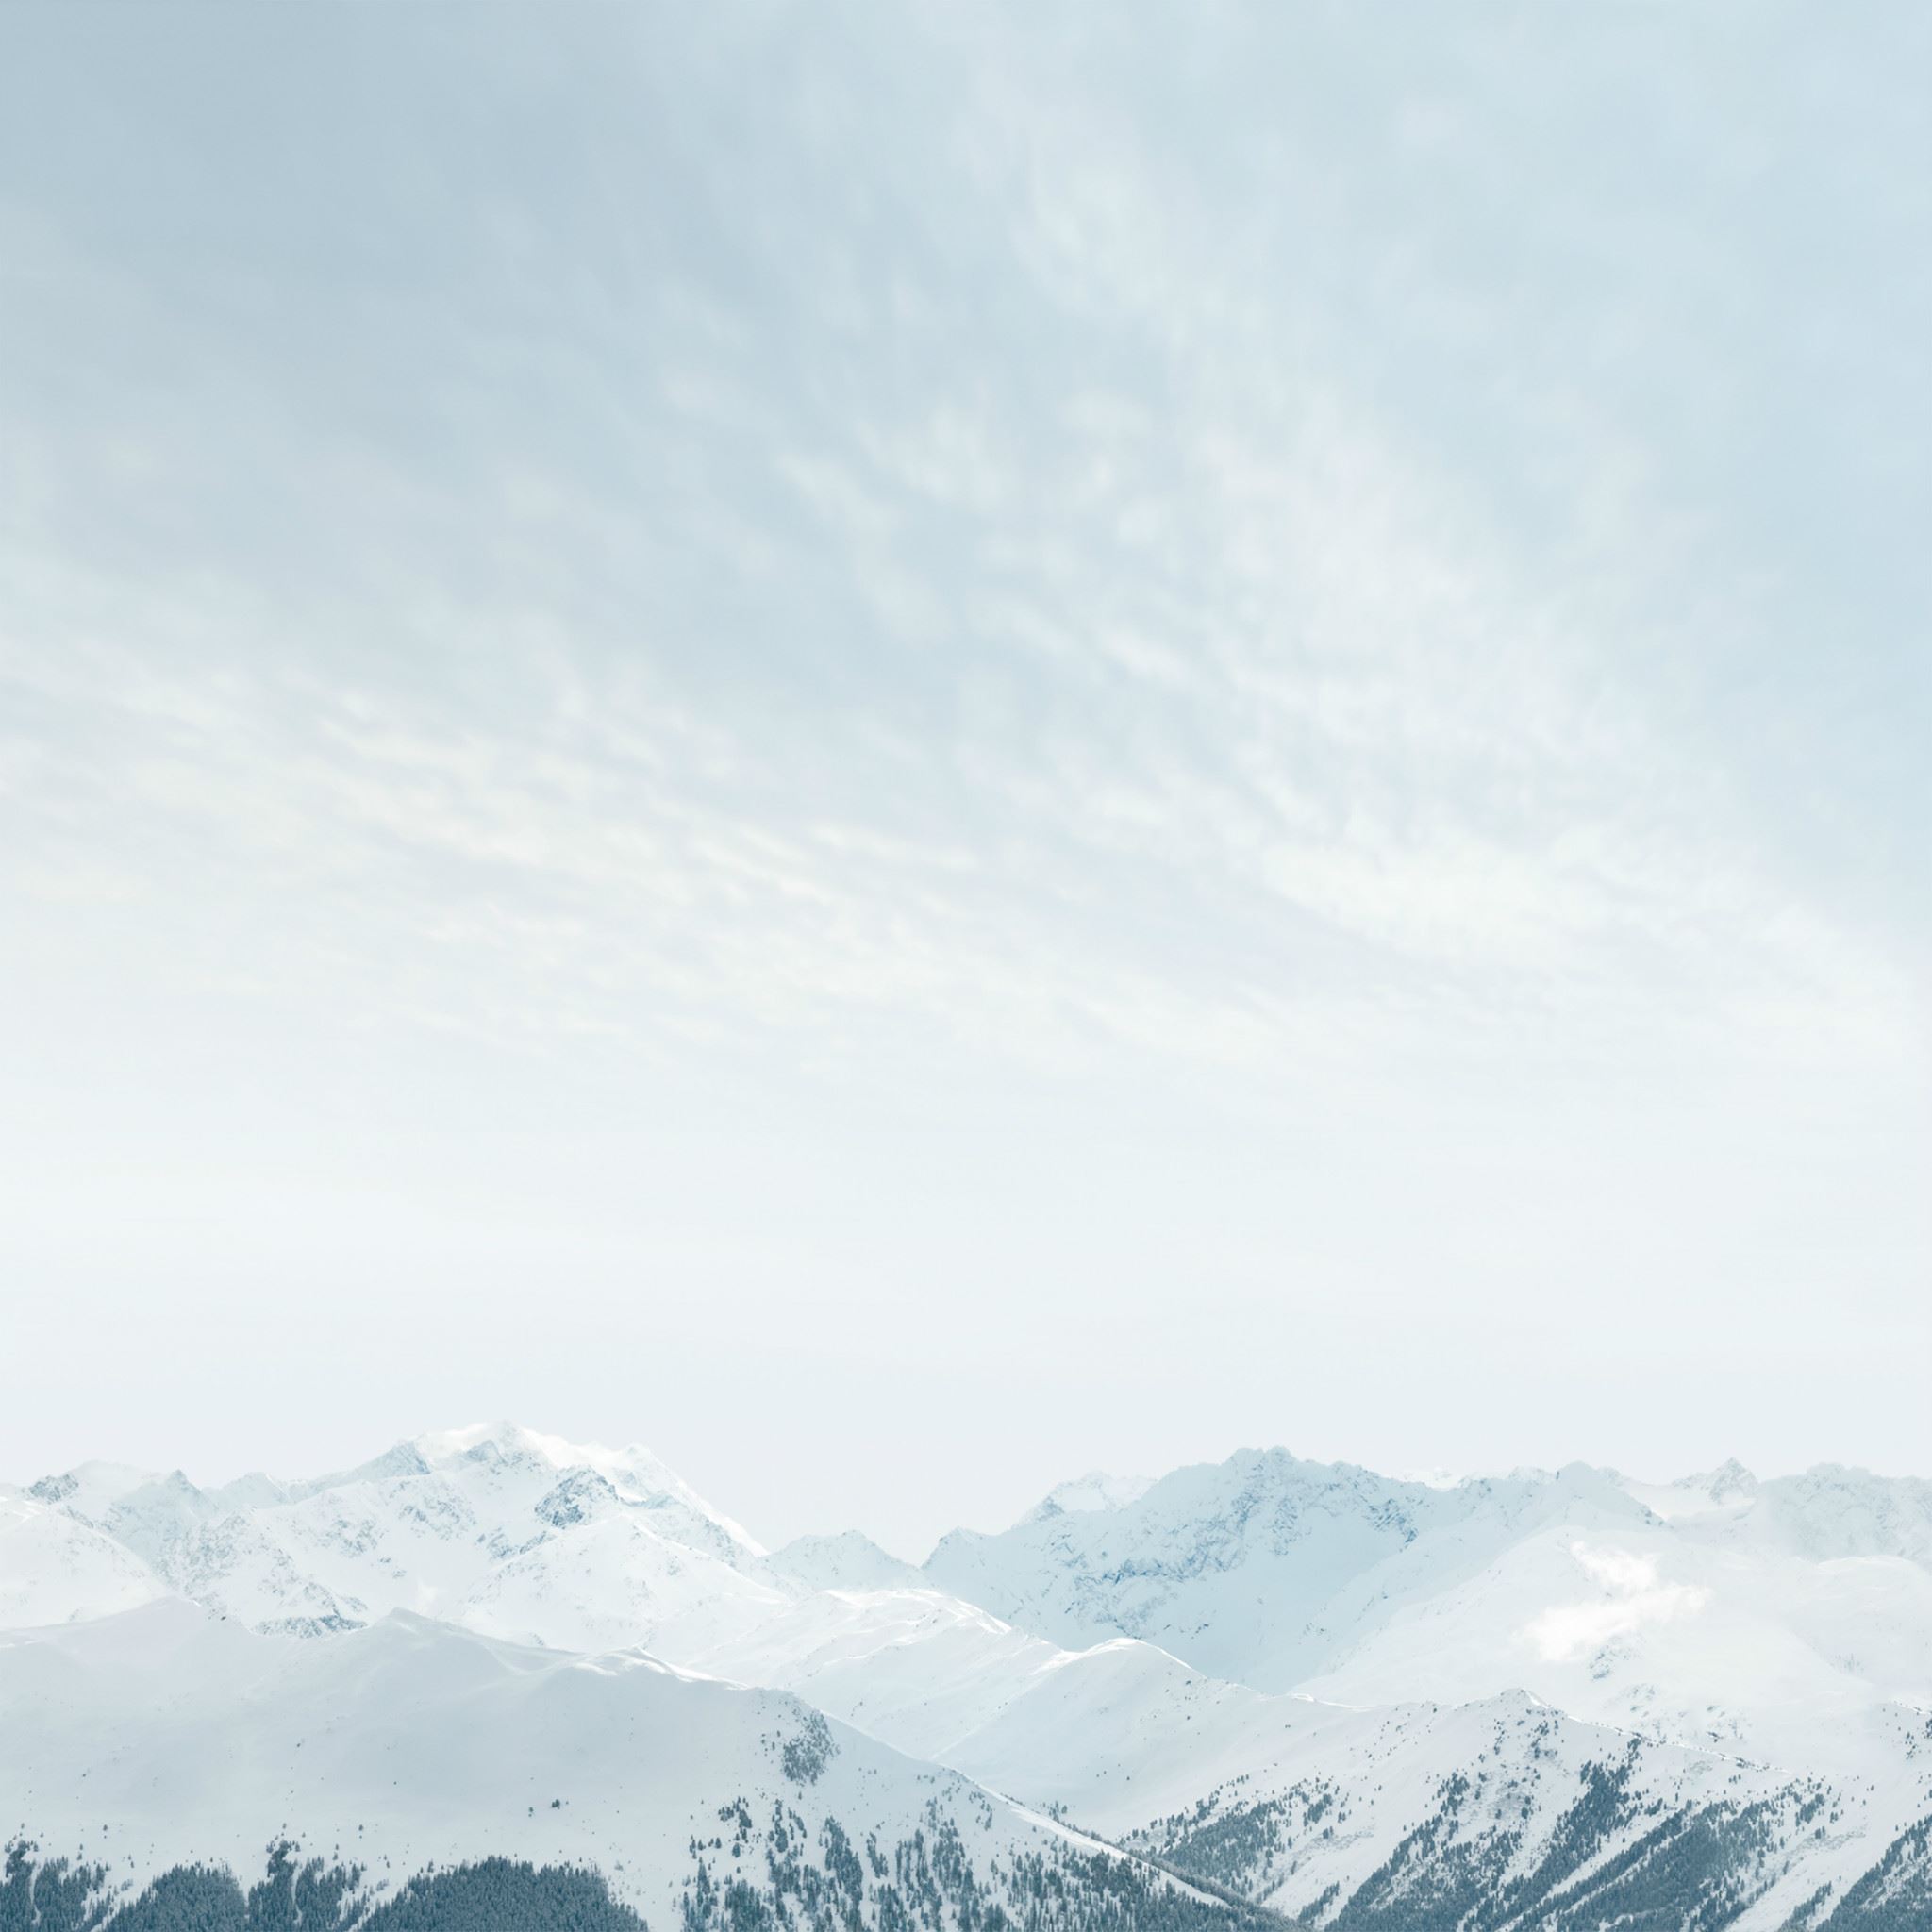 Pure Winter Snowy Mountains Landscape iPad Air wallpaper 